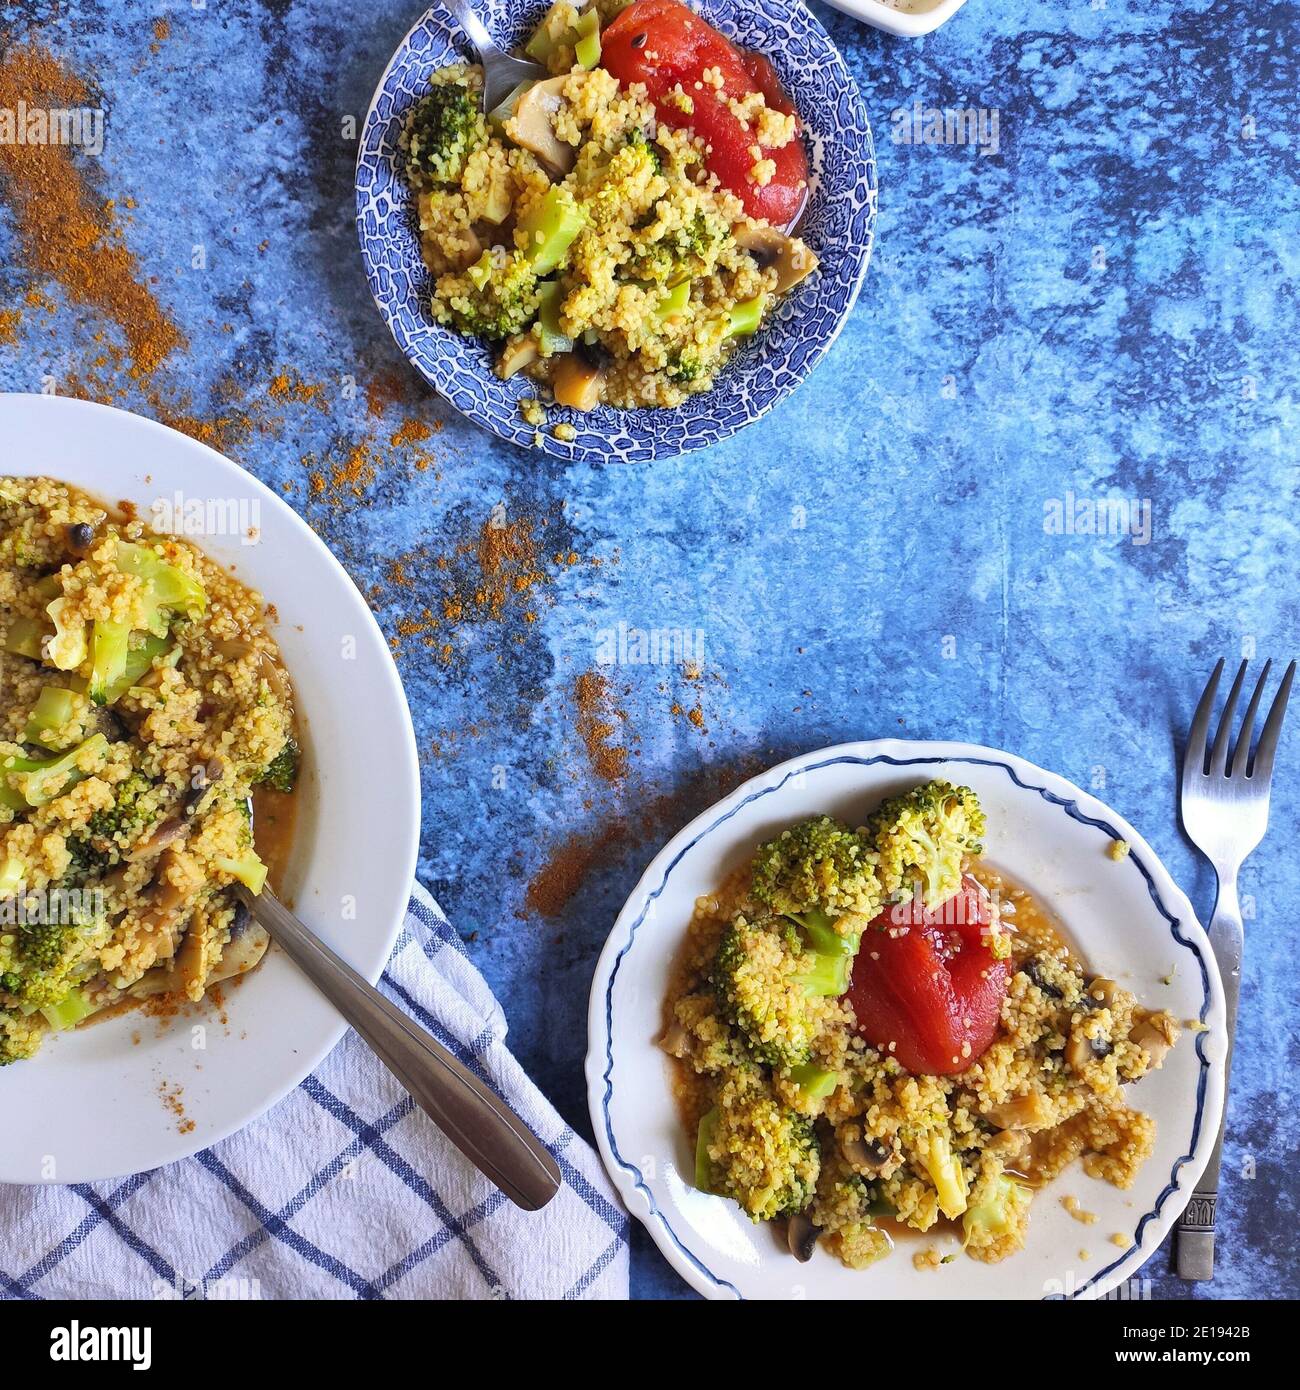 Broccoli and mushroom cous cous Stock Photo